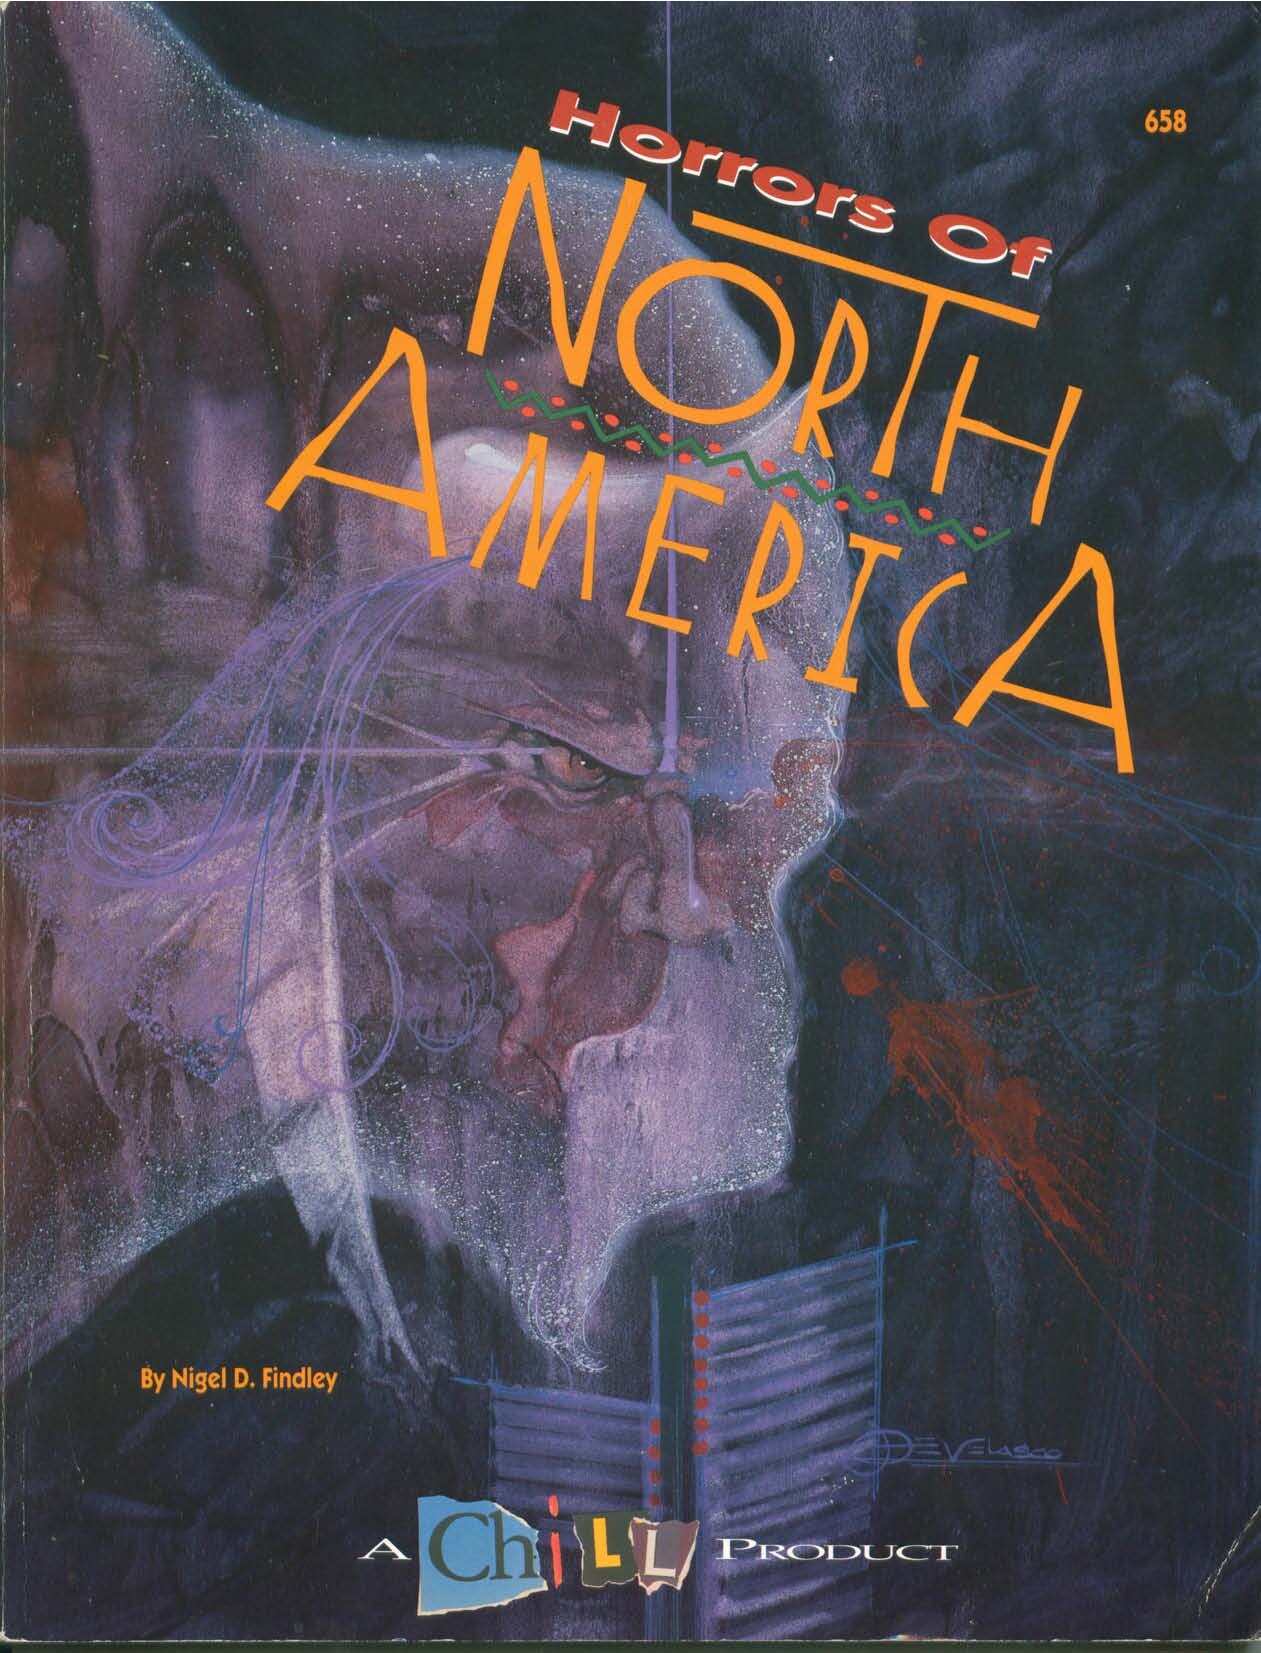 Chill Horrors of North America